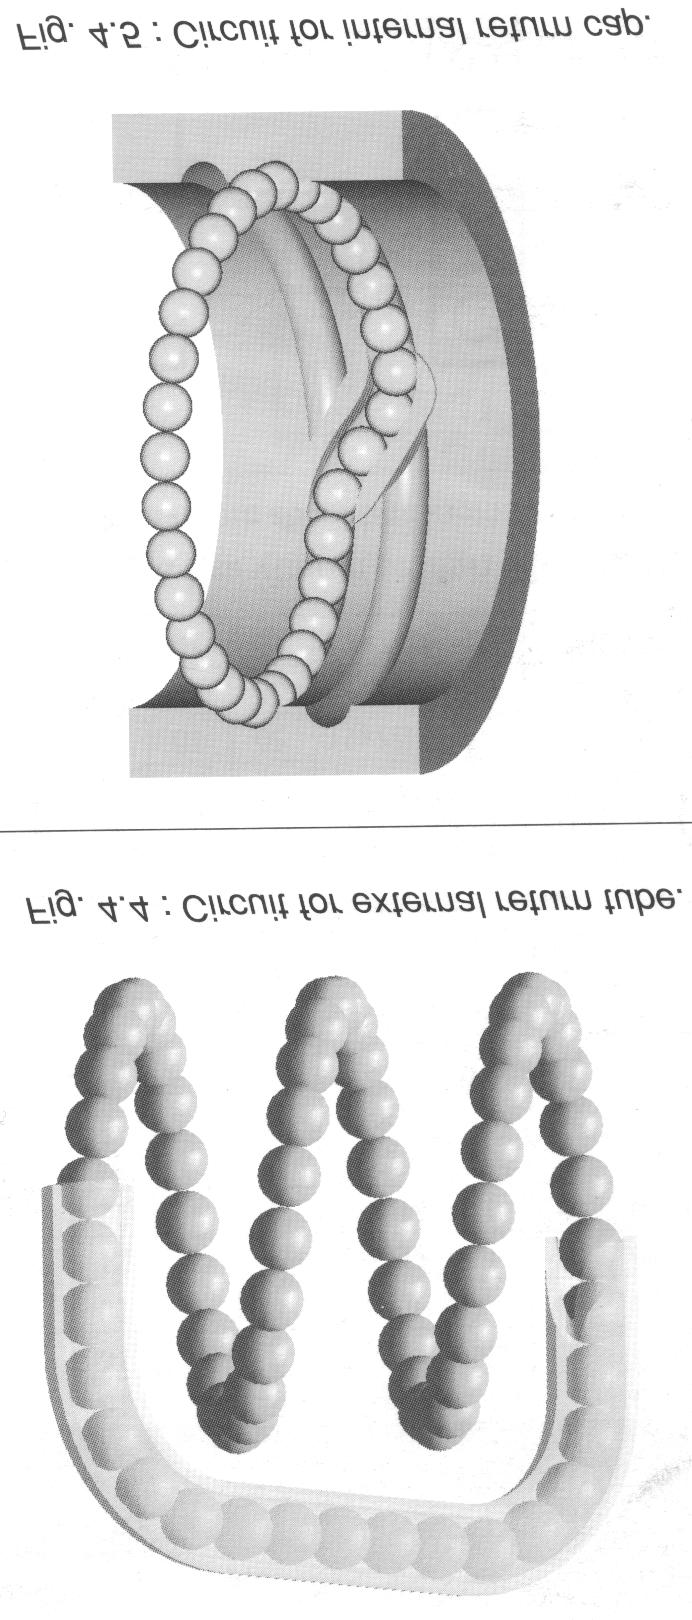 Number of circuits The HIWIN nomenclature for the number of circuits in the ballnut is described as follows : For the external type design: A: 1.5 turns per circuit В: 2.5 turns per circuit С: 3.